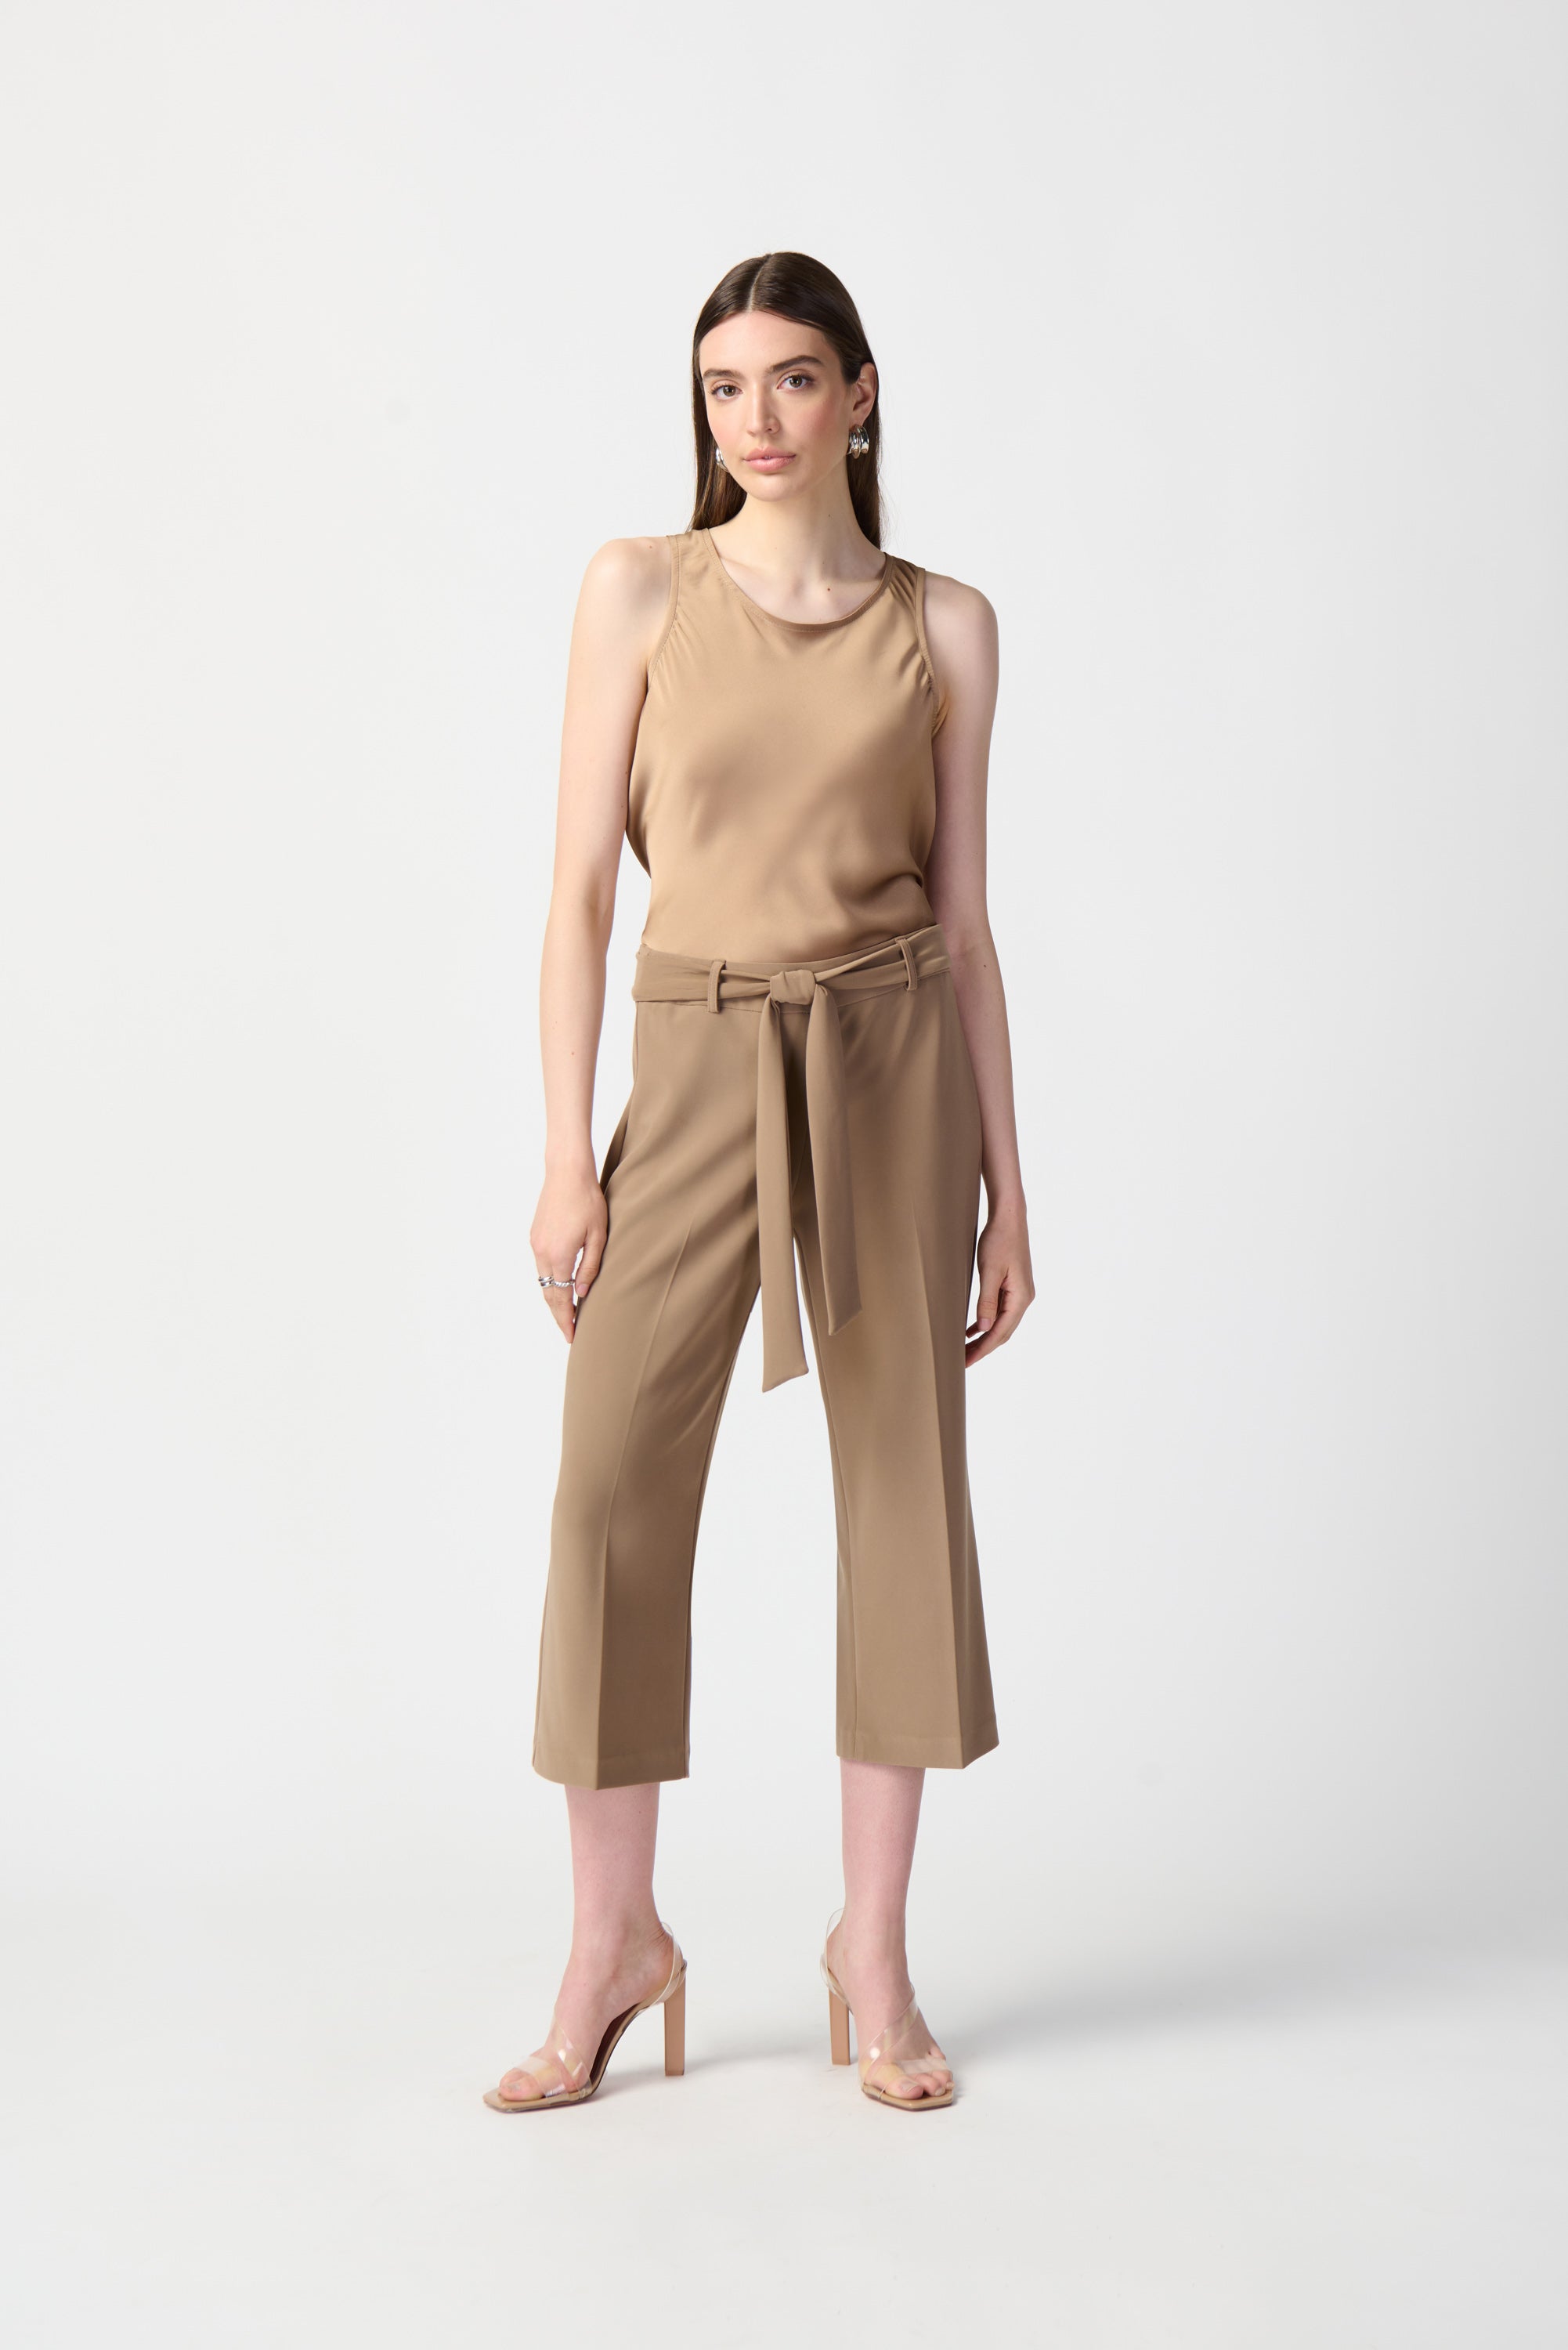 Joseph Ribkoff (241071) Women's Bonded Silky Knit, Cropped Pull On Culotte Pants in Tigereye Brown